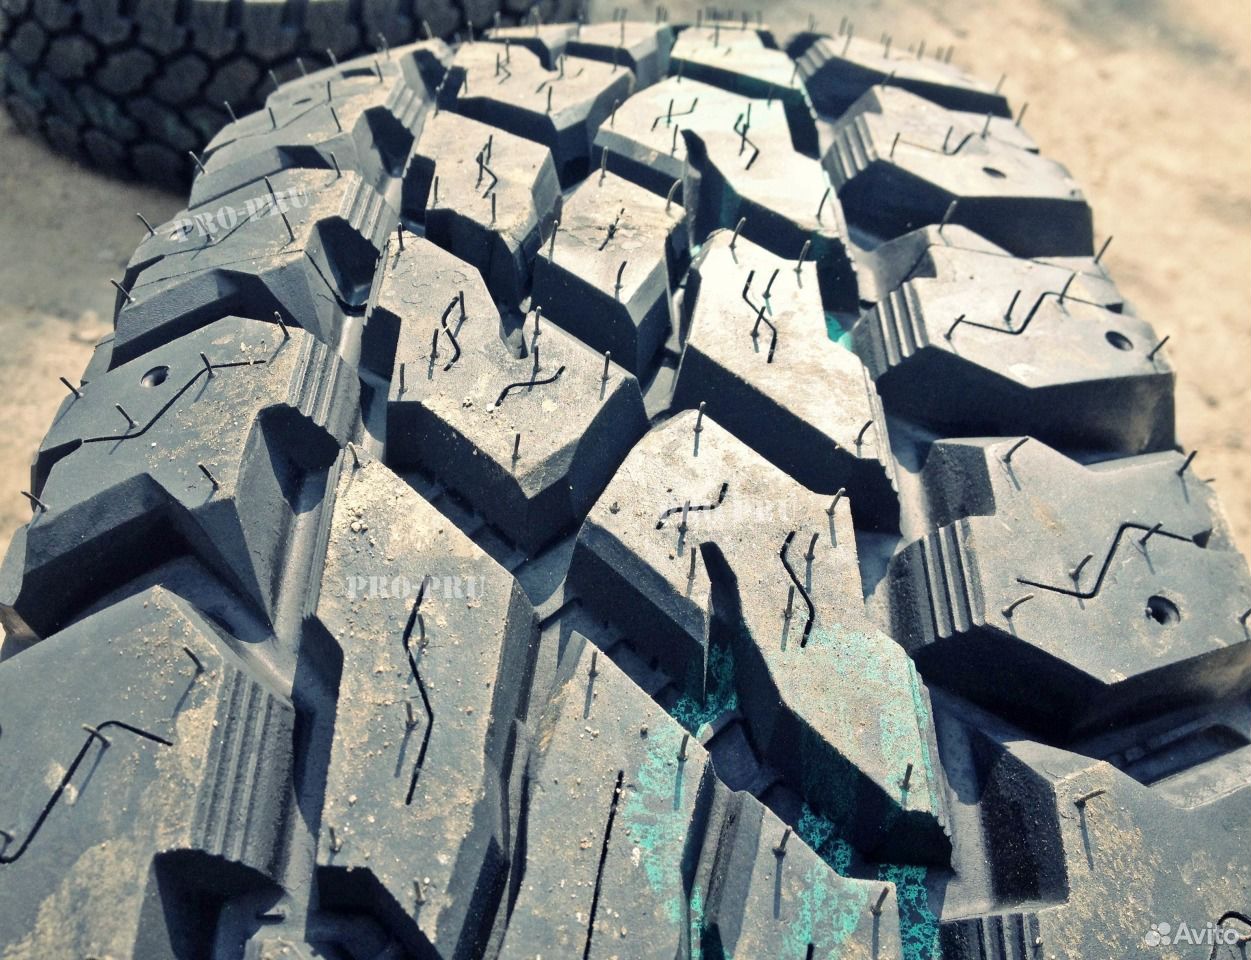 Cooper Discoverer s/t Maxx 235/85 r16. Cooper St Maxx 265/70 r17. 265/70 R16 Cooper Discoverer. Резина грязевая Купер r15 Дискавери s t. Резина 235 85 r16